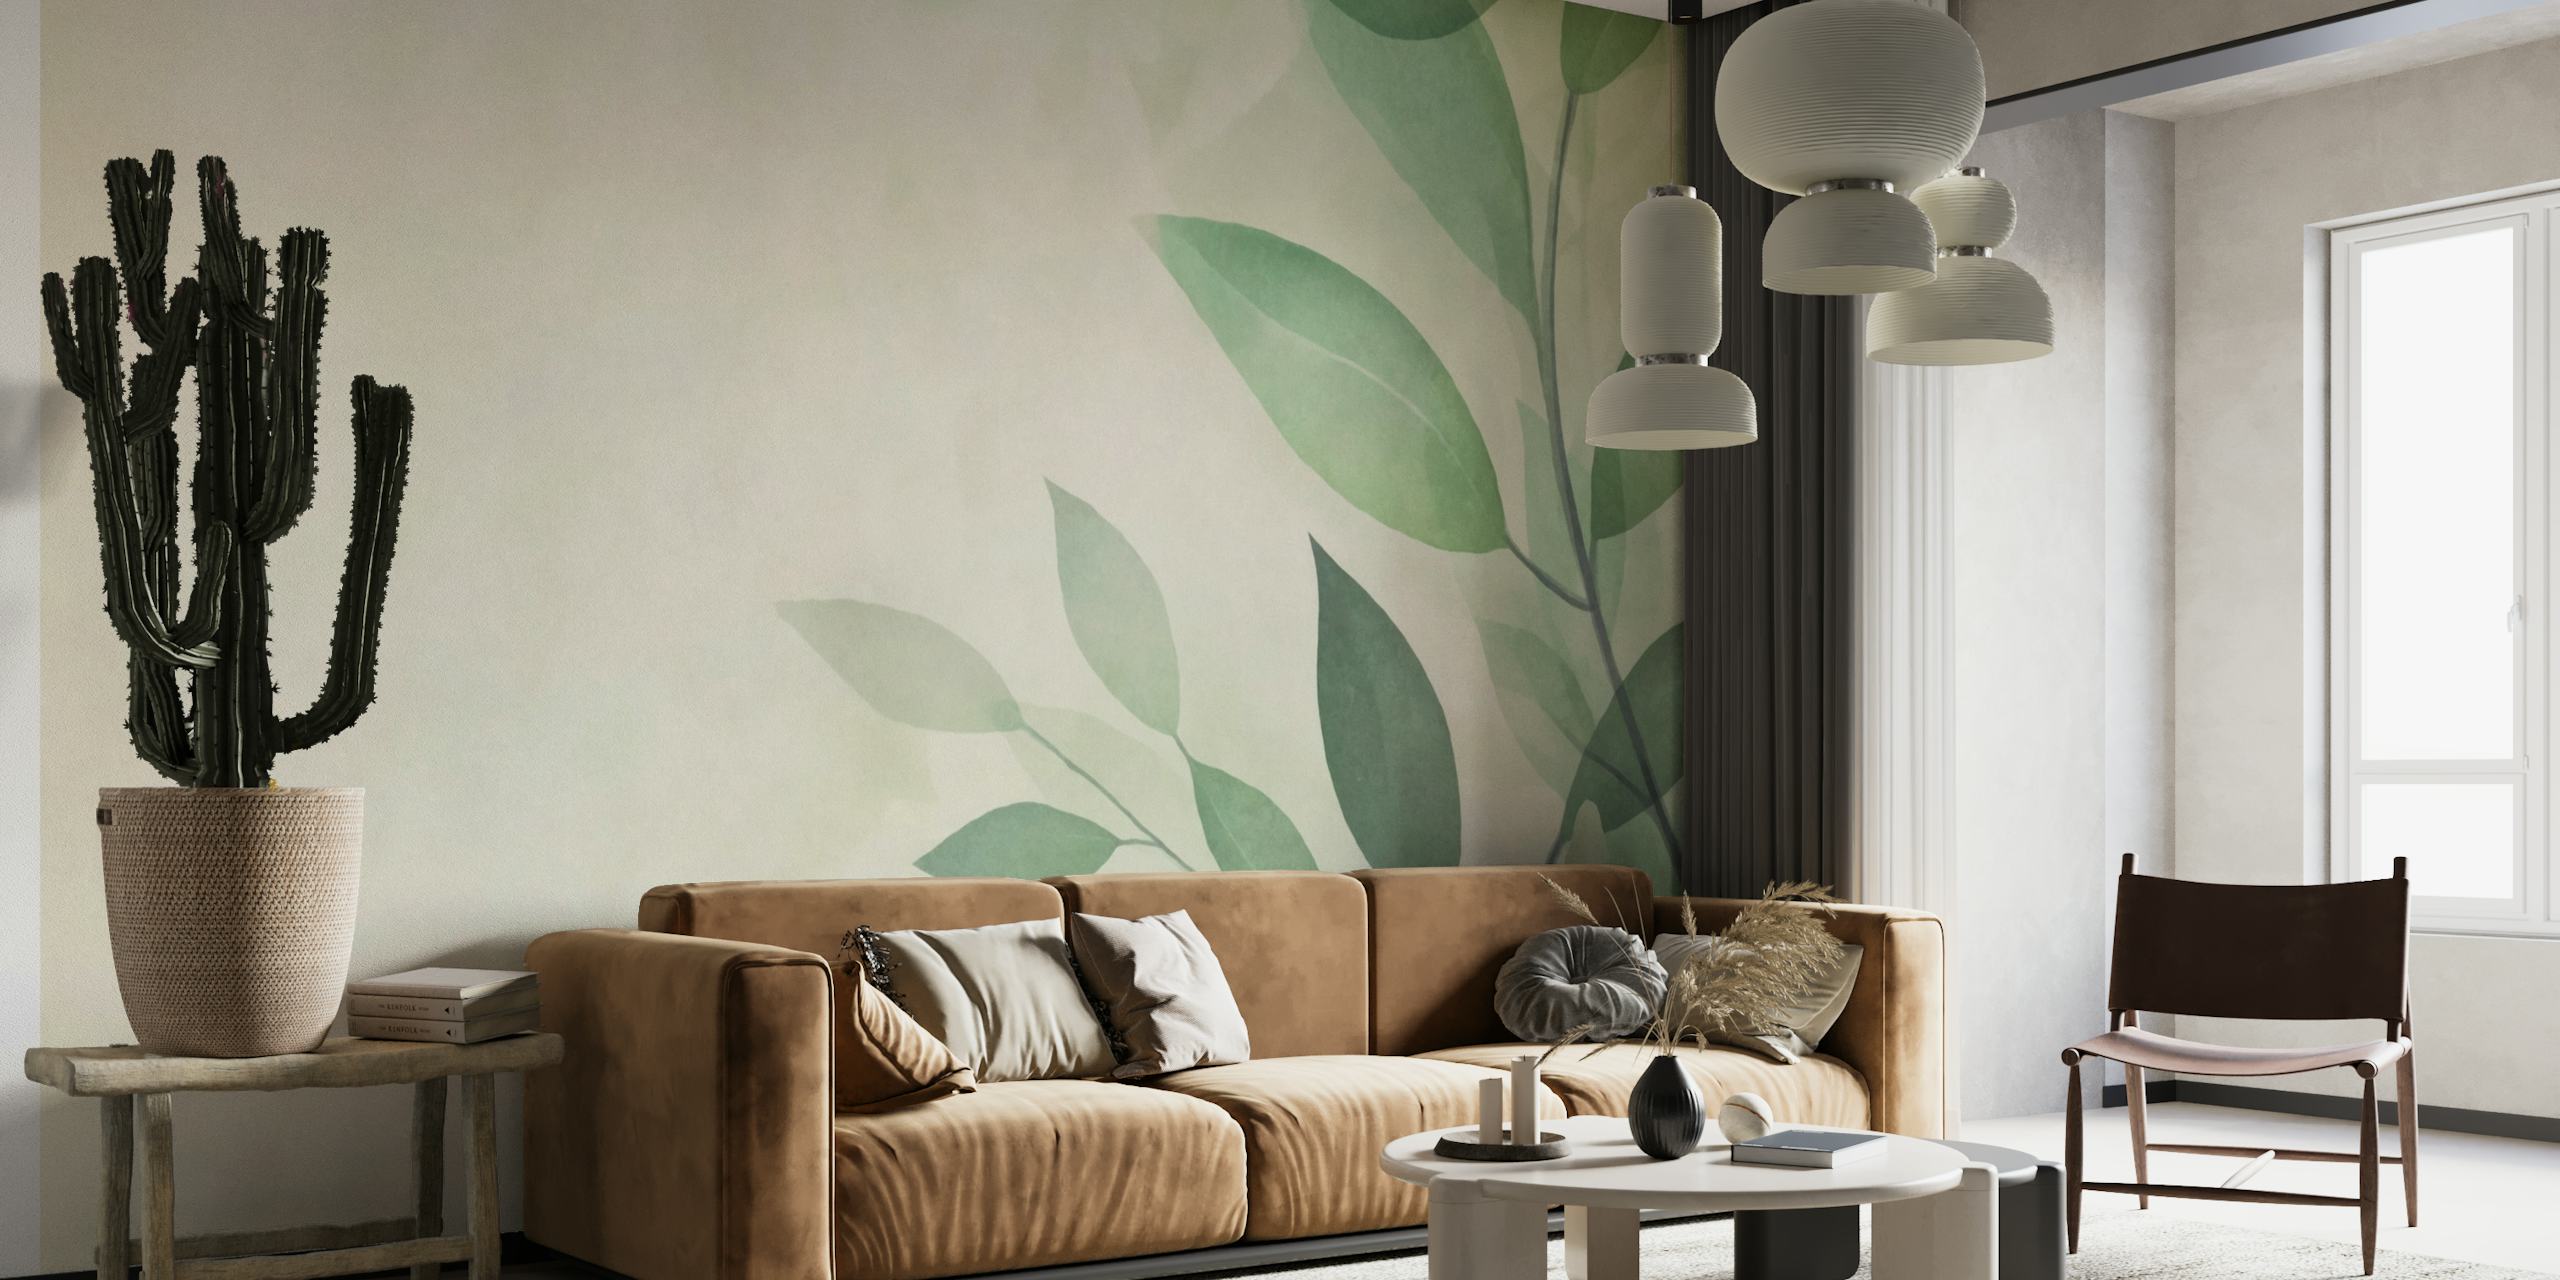 Soft green leaves wall mural on a neutral background for a peaceful interior aesthetic